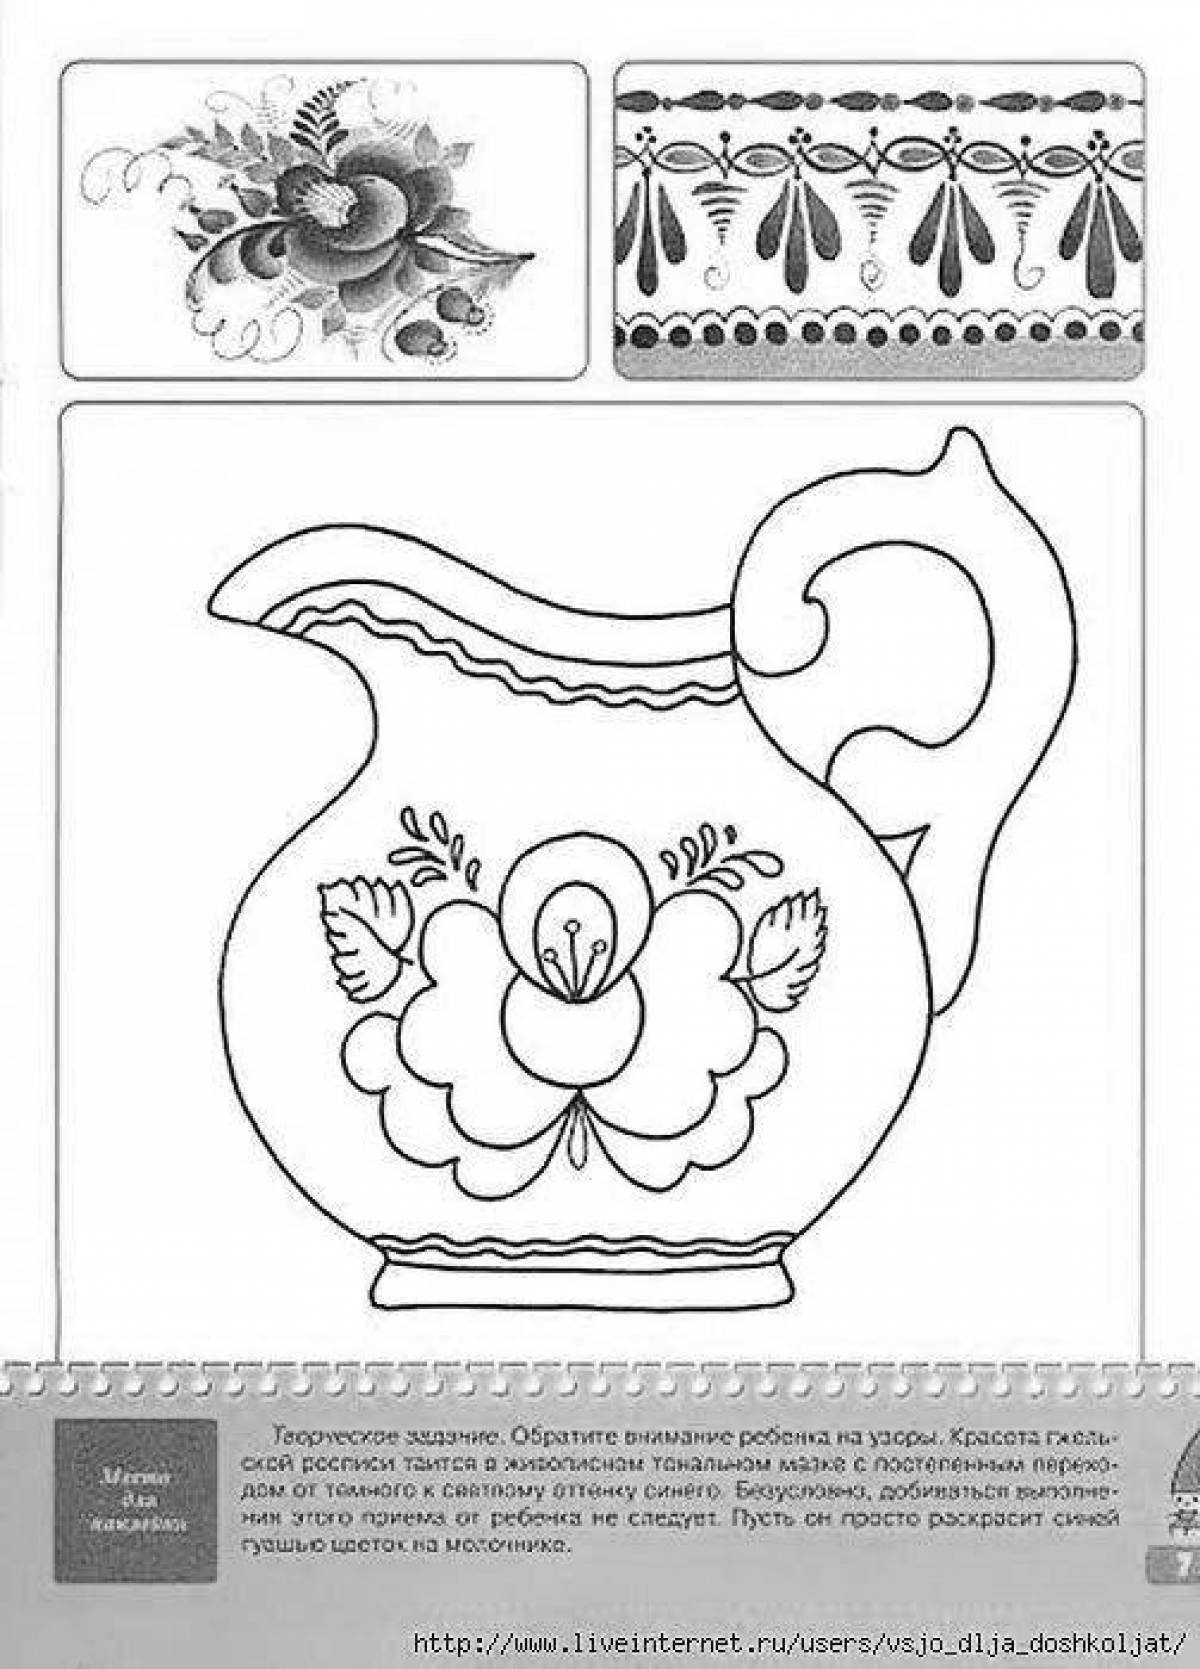 Coloring book charming Gzhel plate